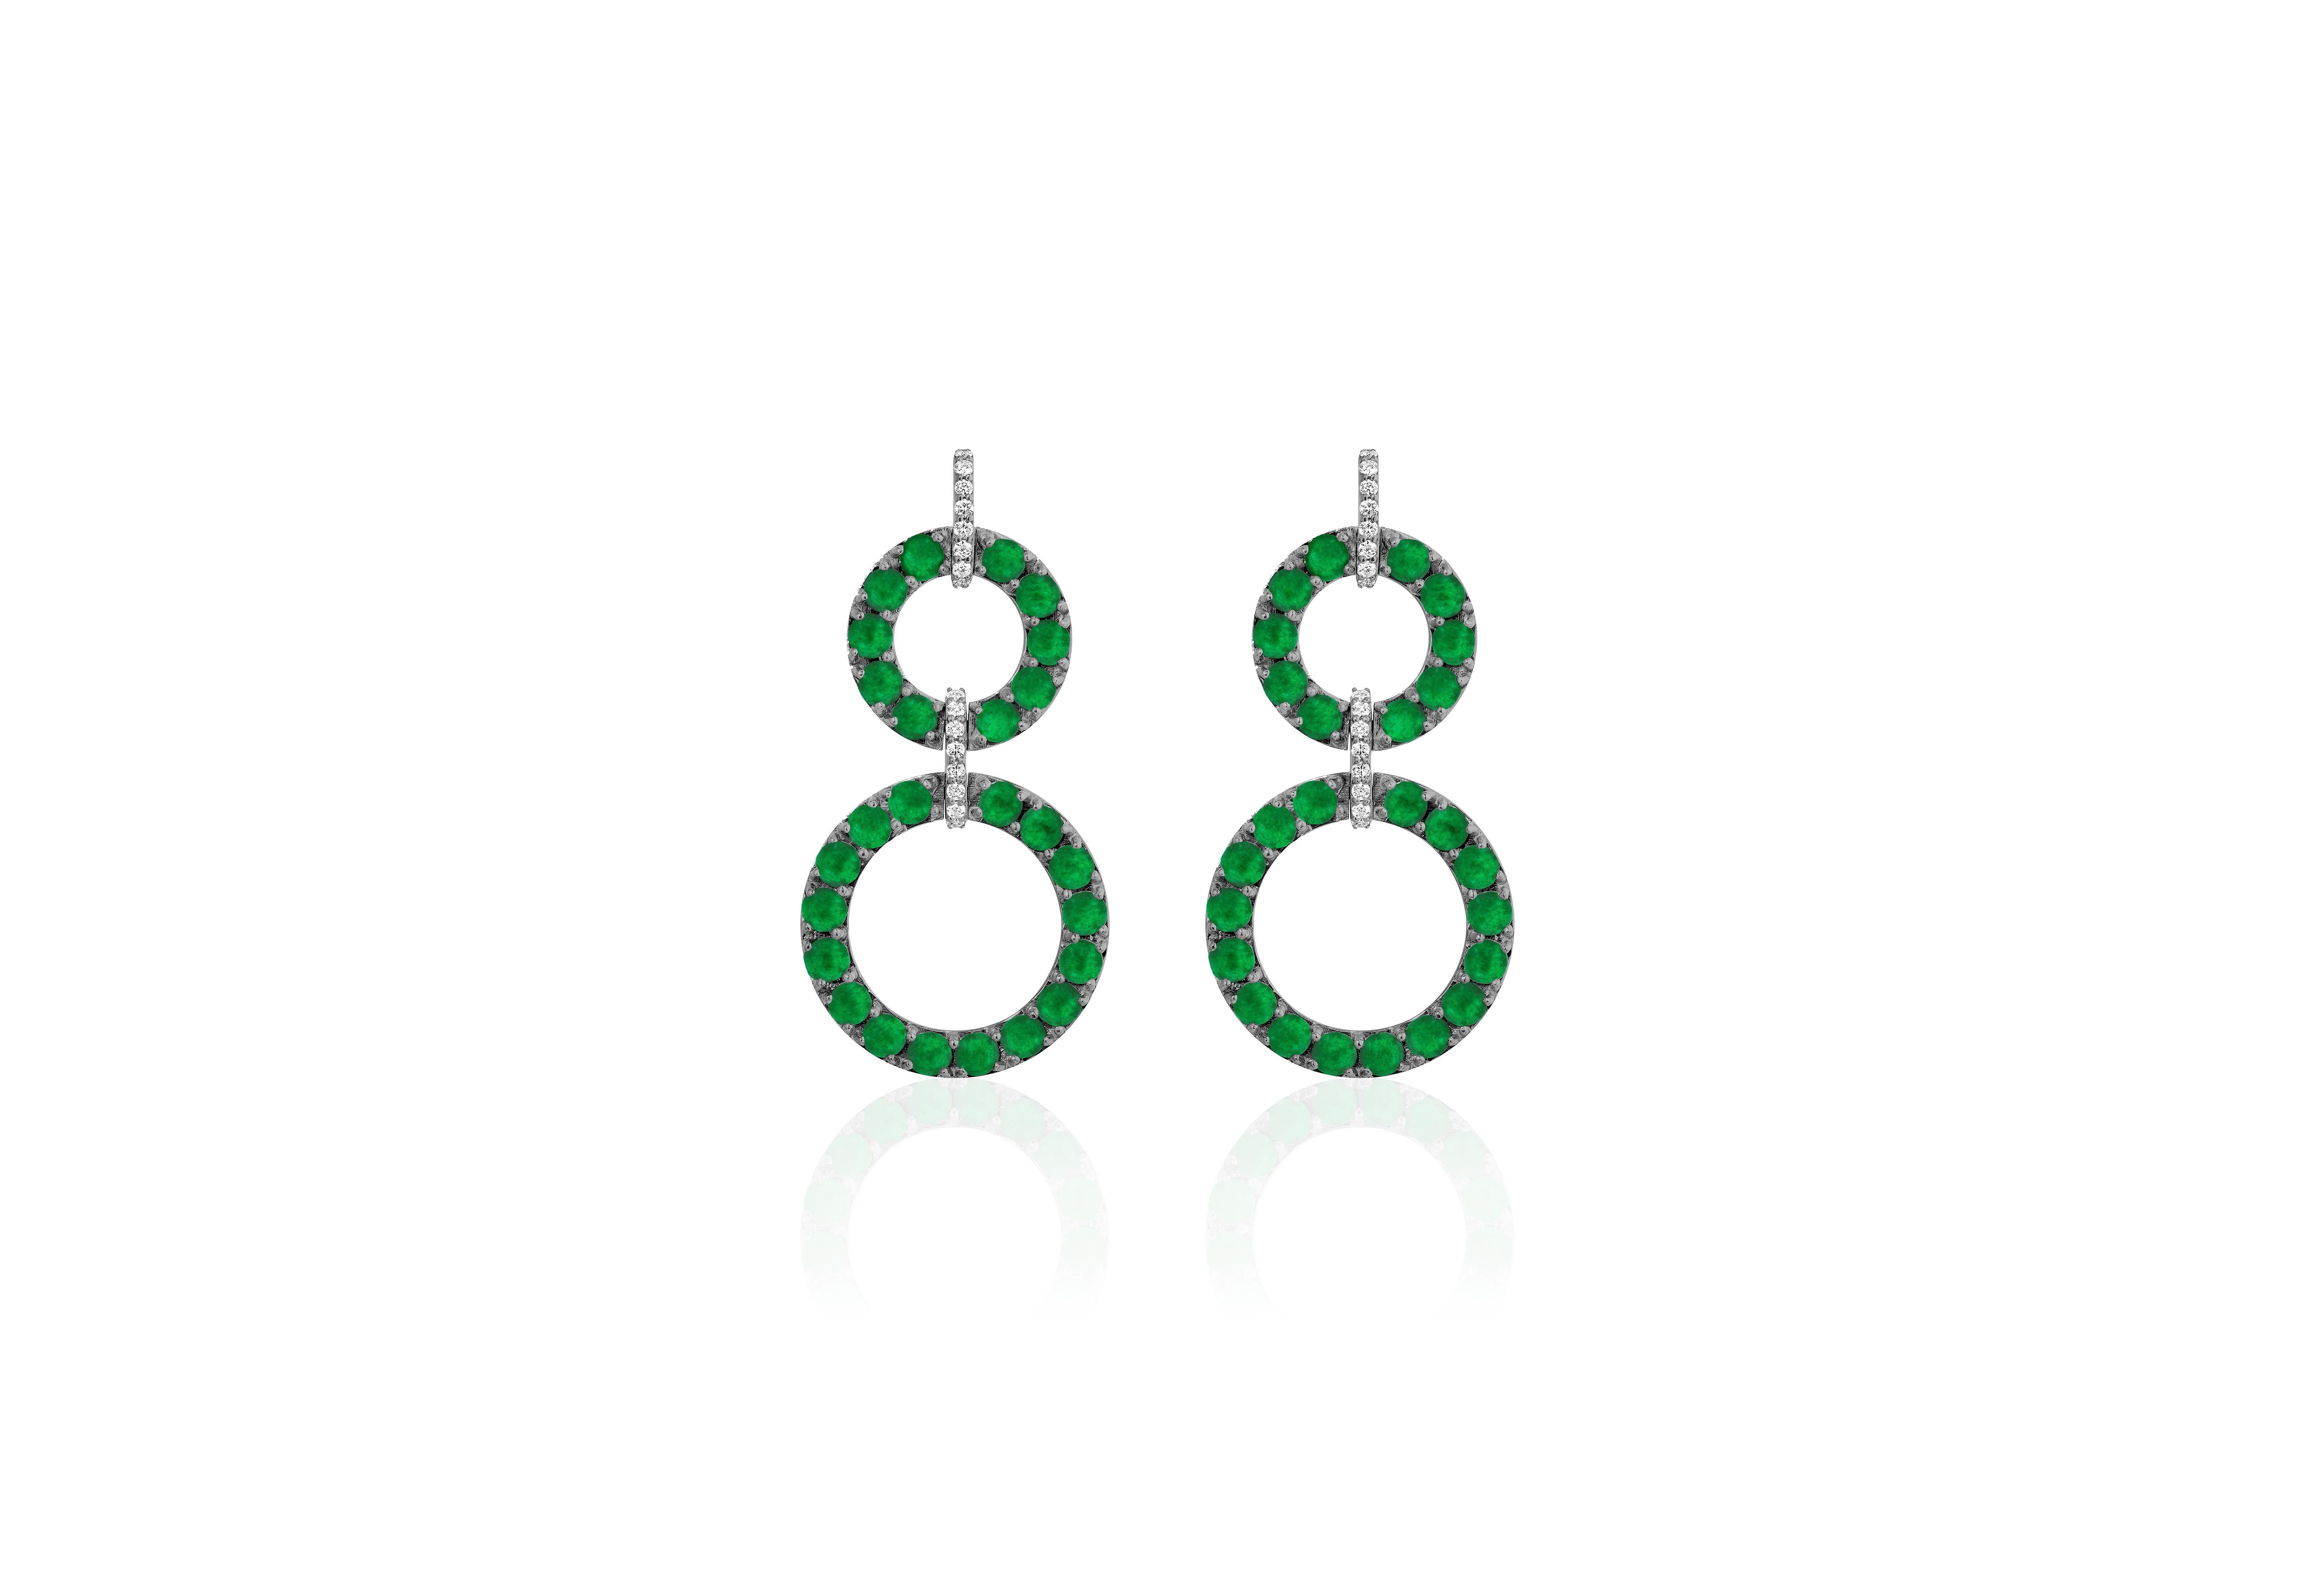 ‘Limited-Edition’ Emerald Cabochon 2 Row Earrings With Diamonds in 18K White Gold. The Emeralds makes these earrings very special, and a great piece to have in your personal collection.

* Gemstone: 100% Earth Mined 
* Approx. gemstone Weight: 6.20